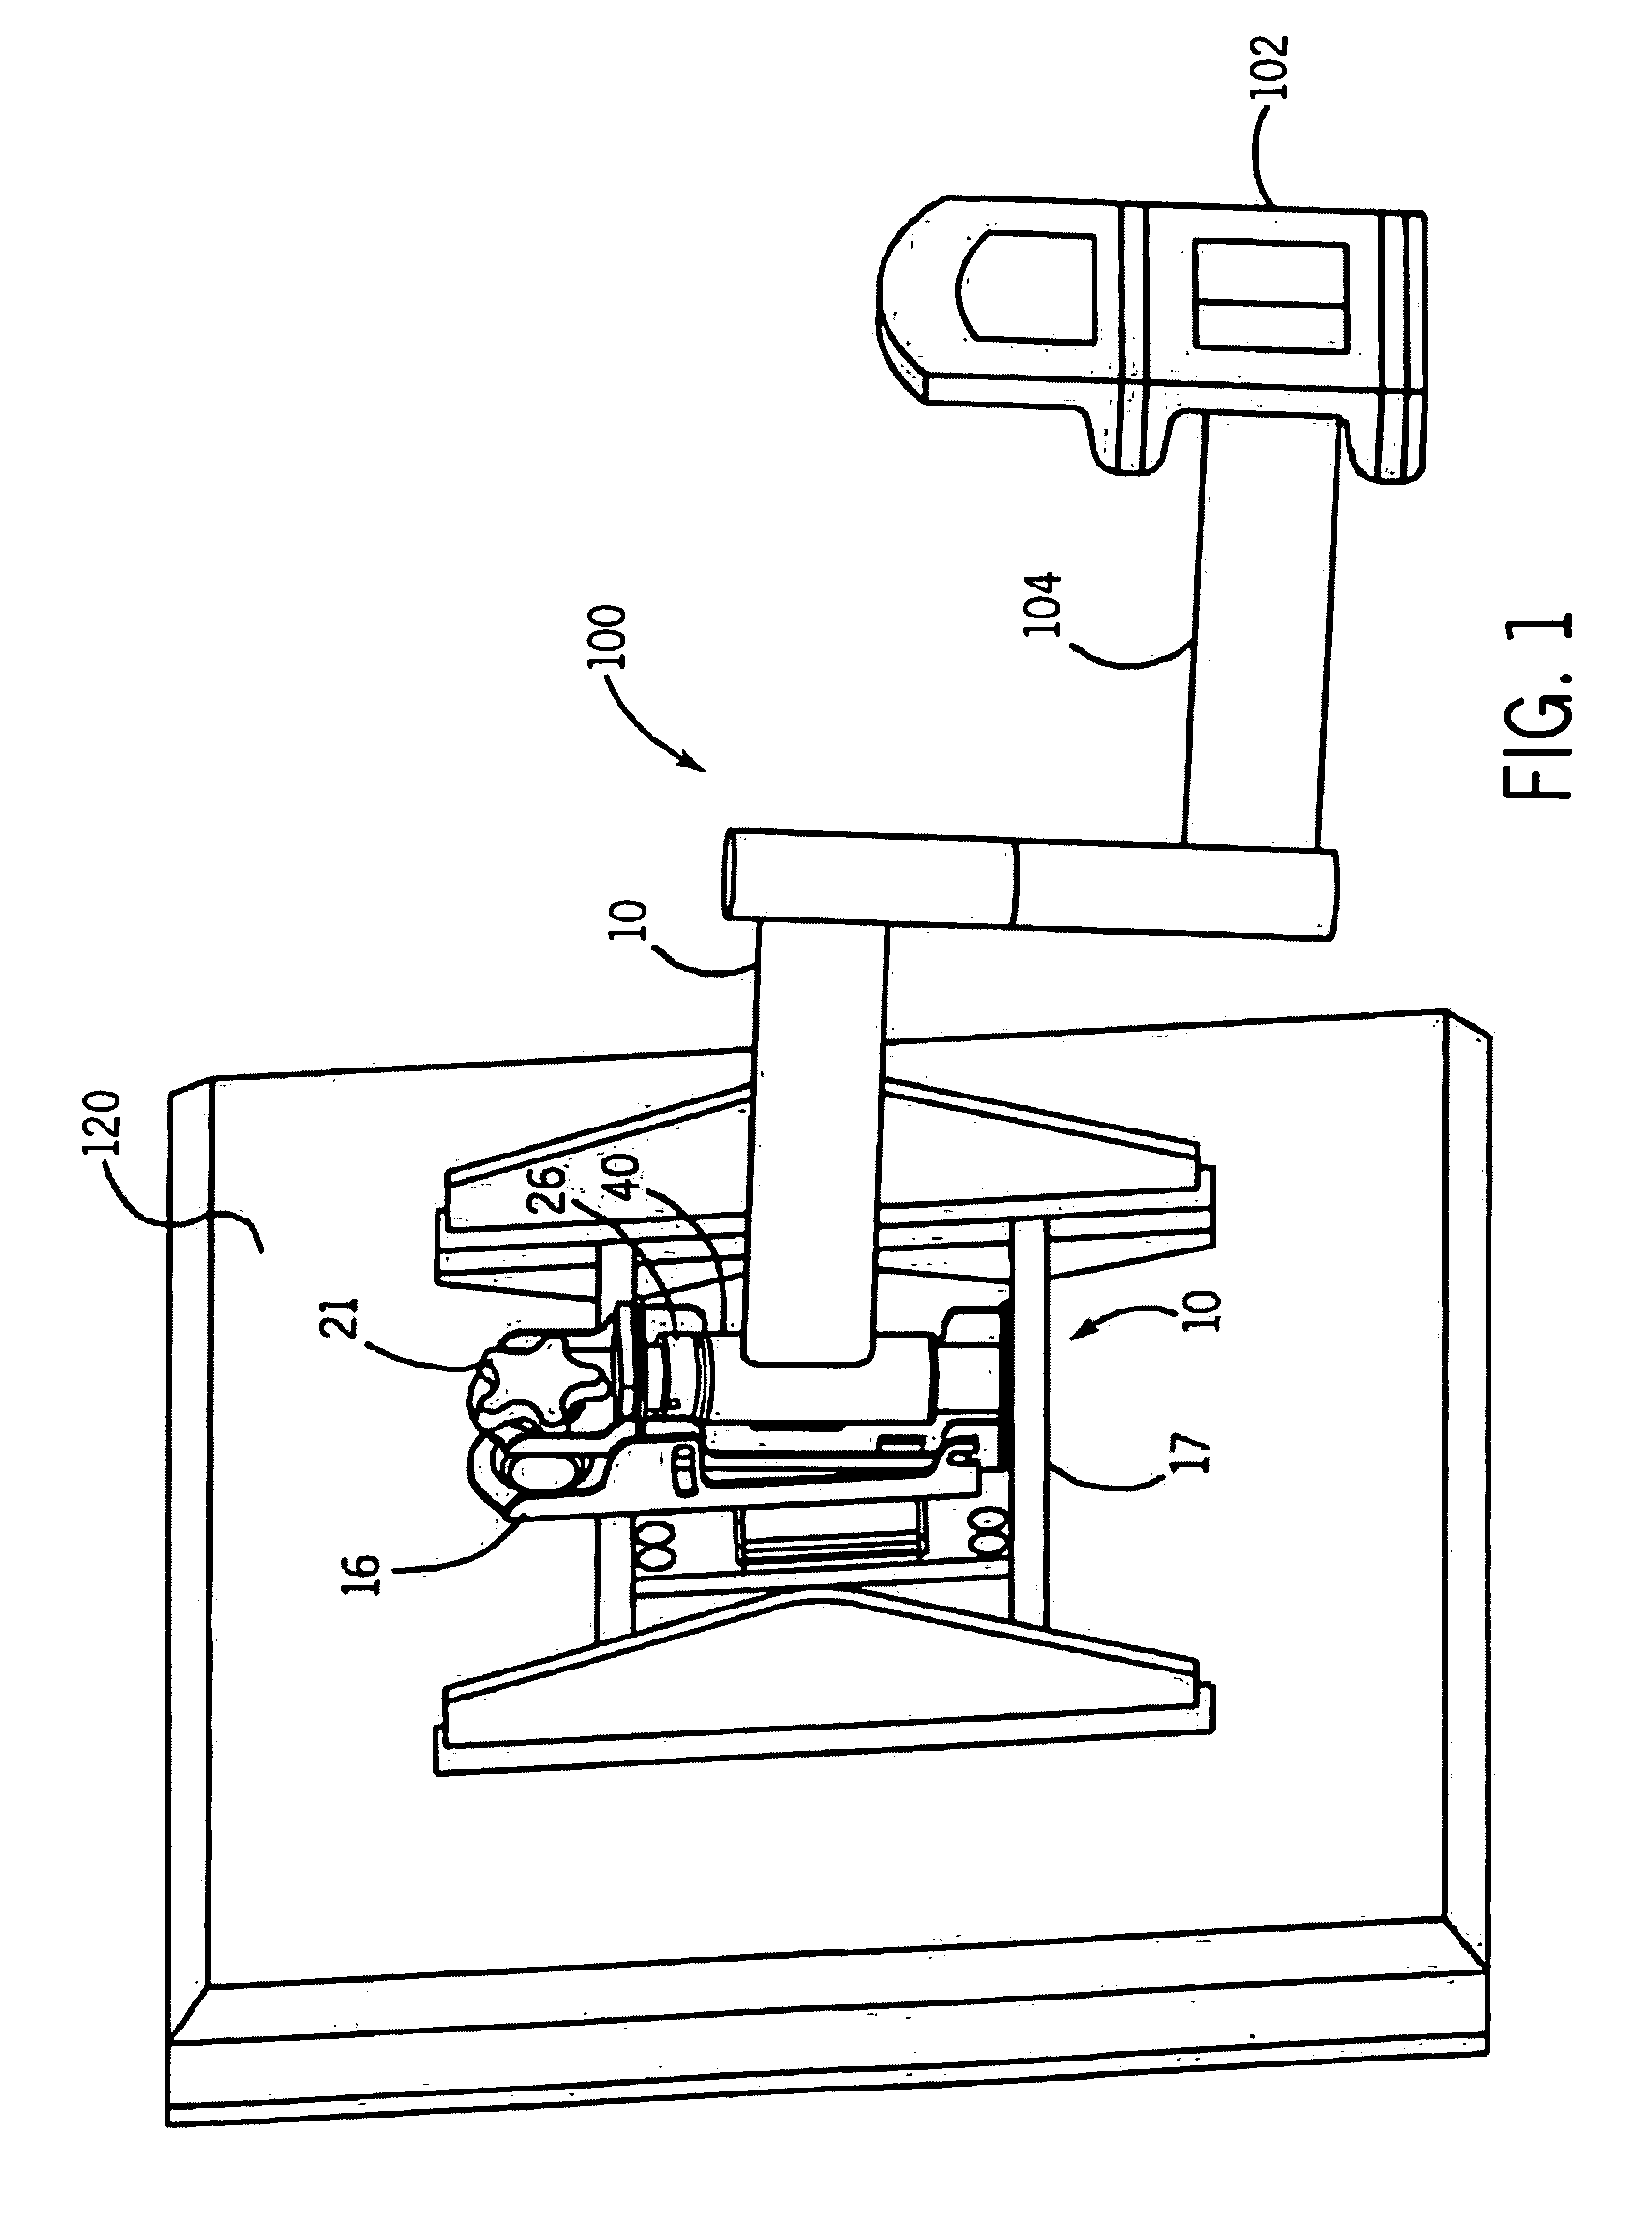 Mounting system with vertical adjustment feature